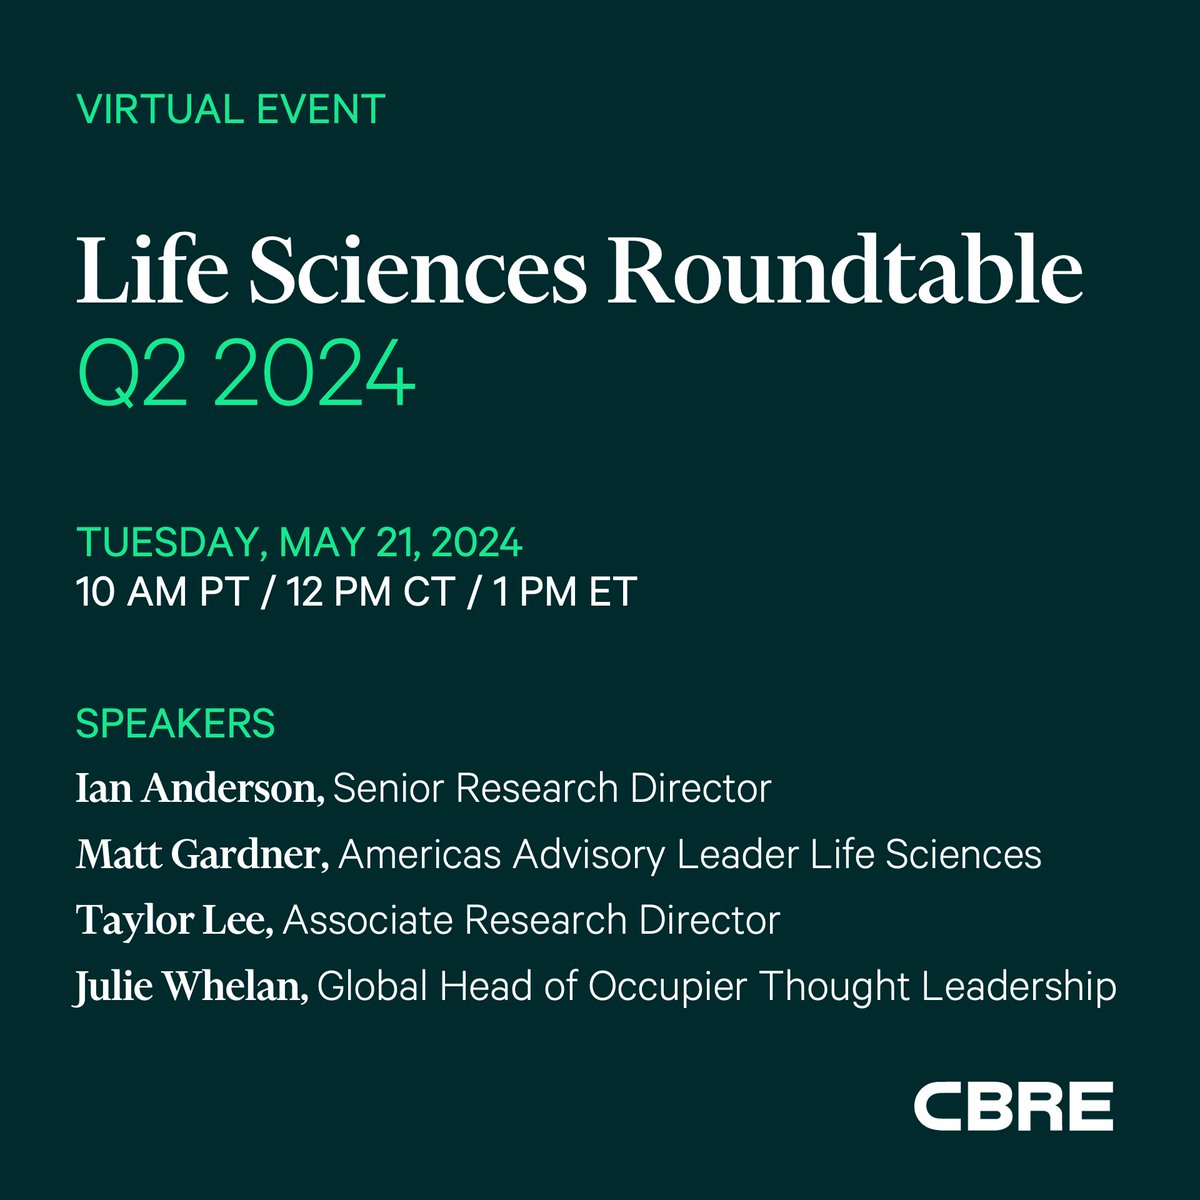 Join us on May 21 for our next Life Sciences Roundtable, where #CBRE experts will discuss key findings from recently released research and what’s top of mind for occupiers. Register here: cbre.co/3QuxXZz